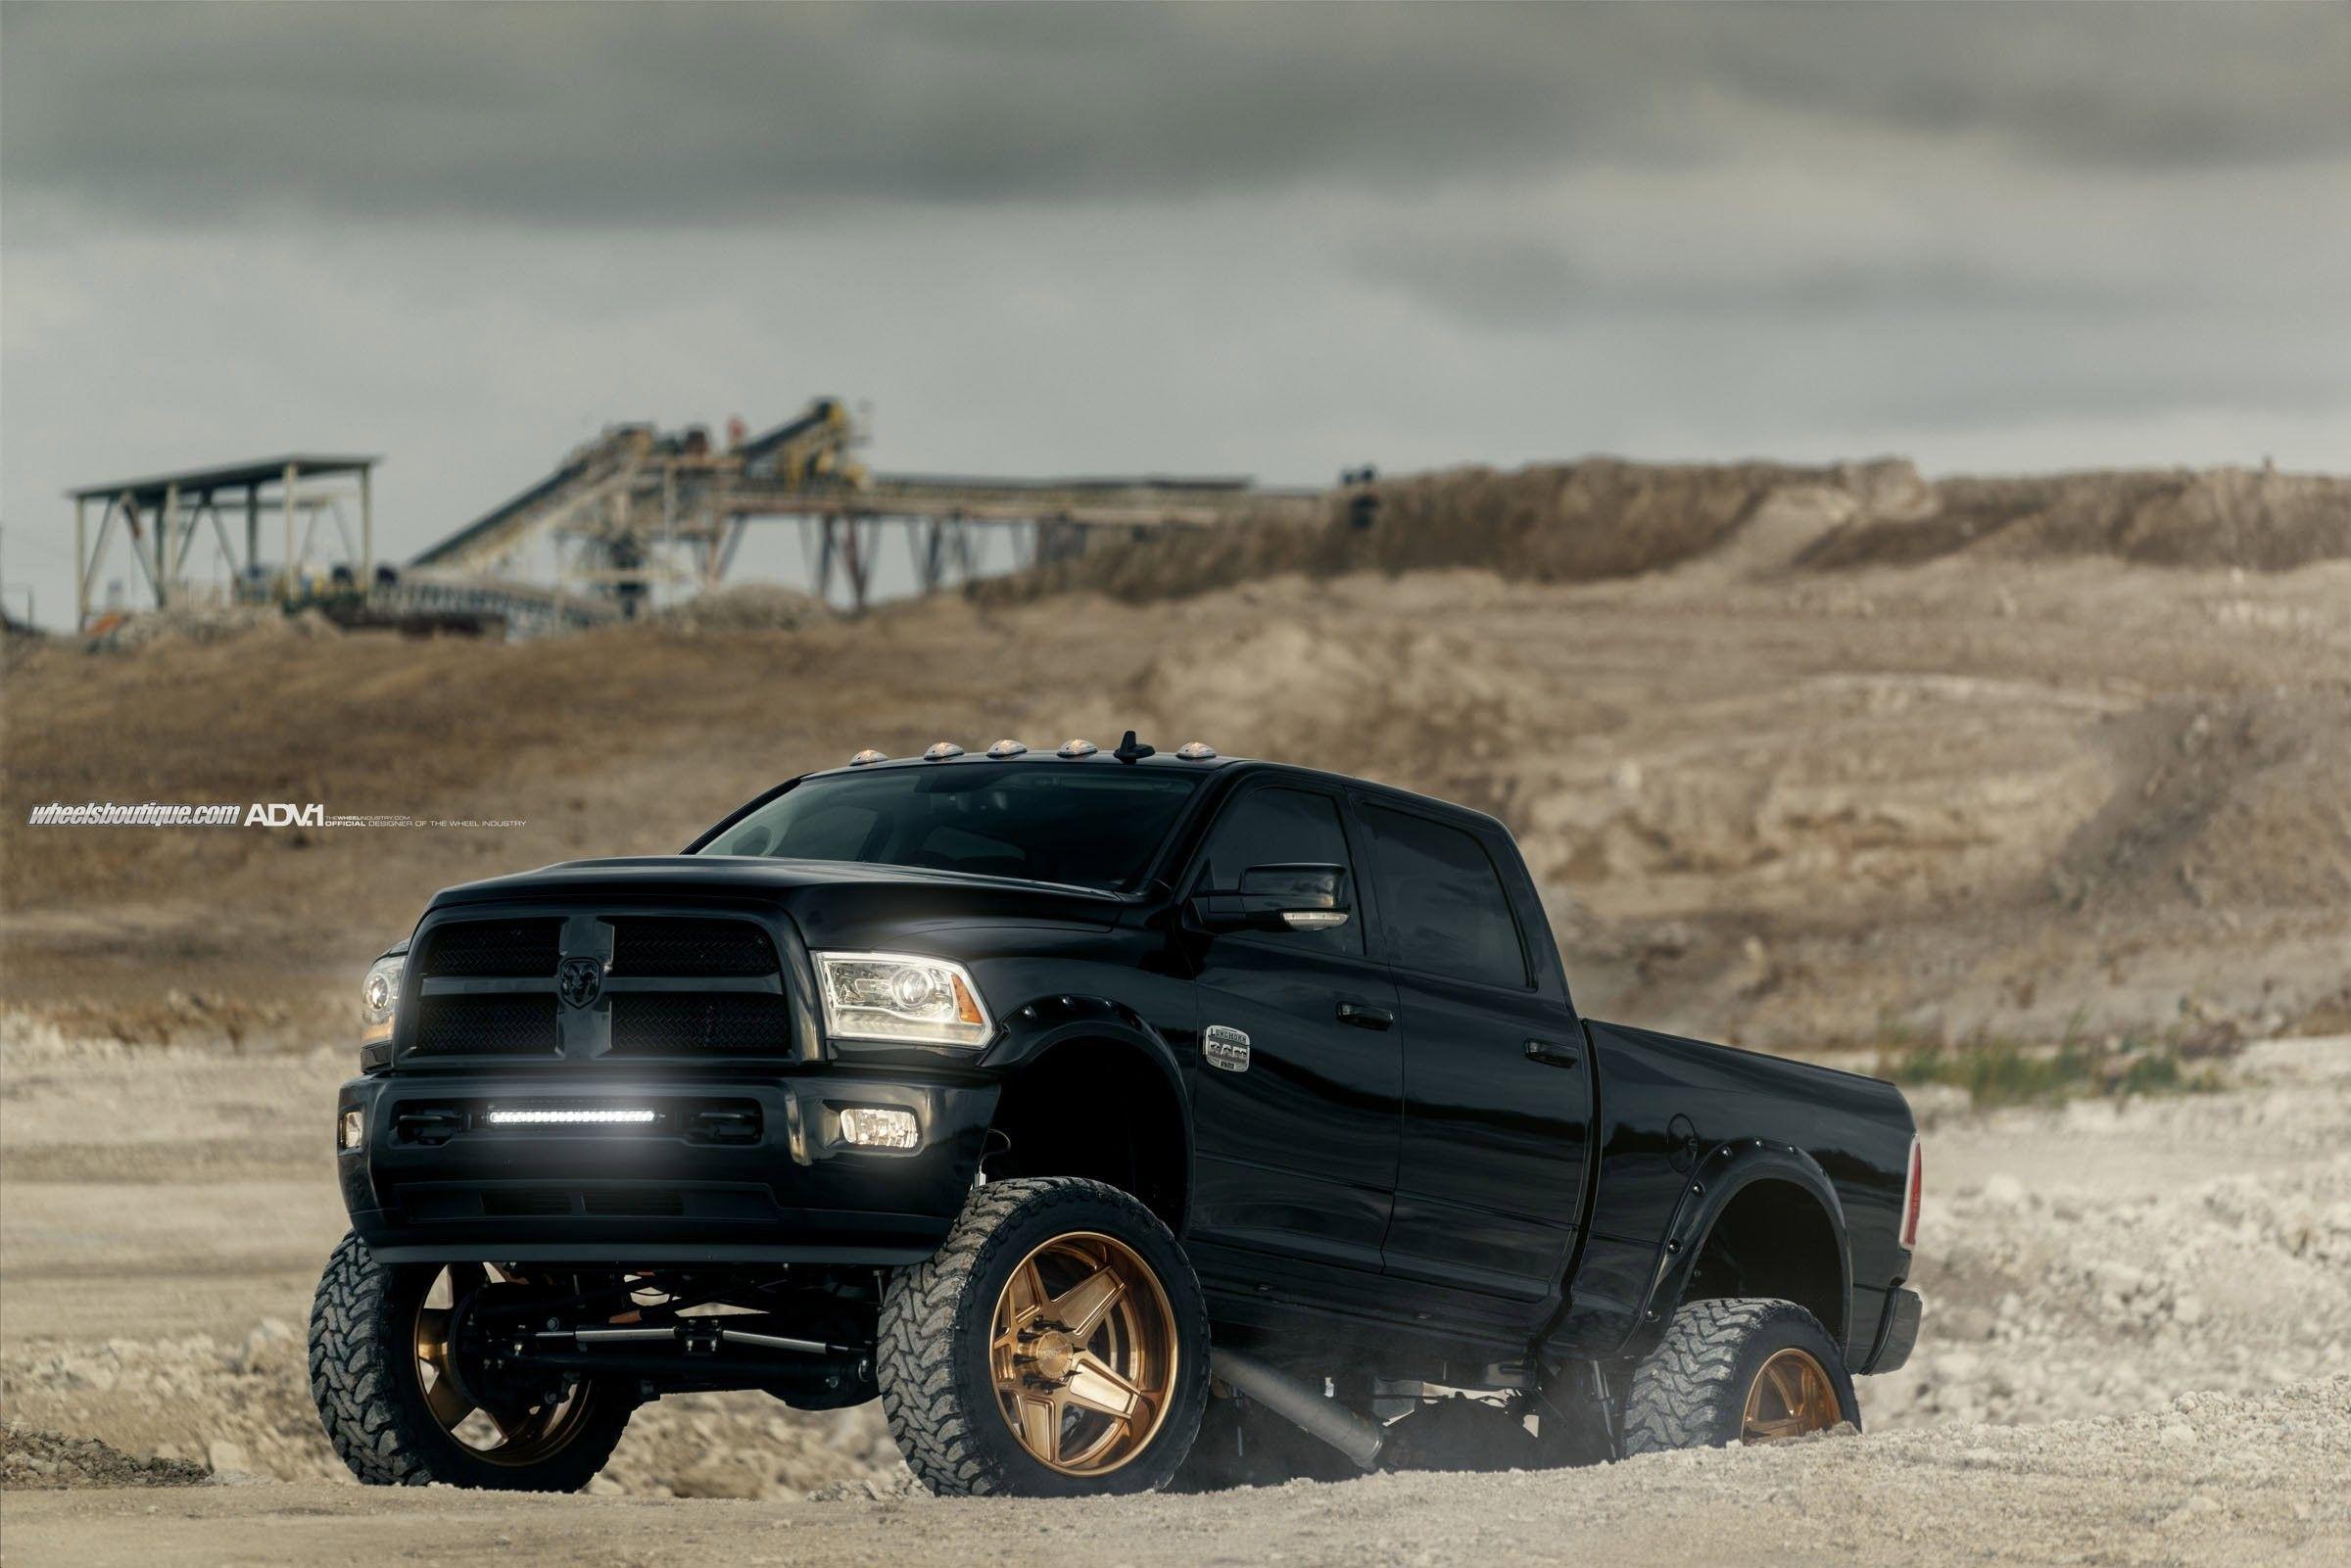 Lifted Truck Wallpaper HD 49 images